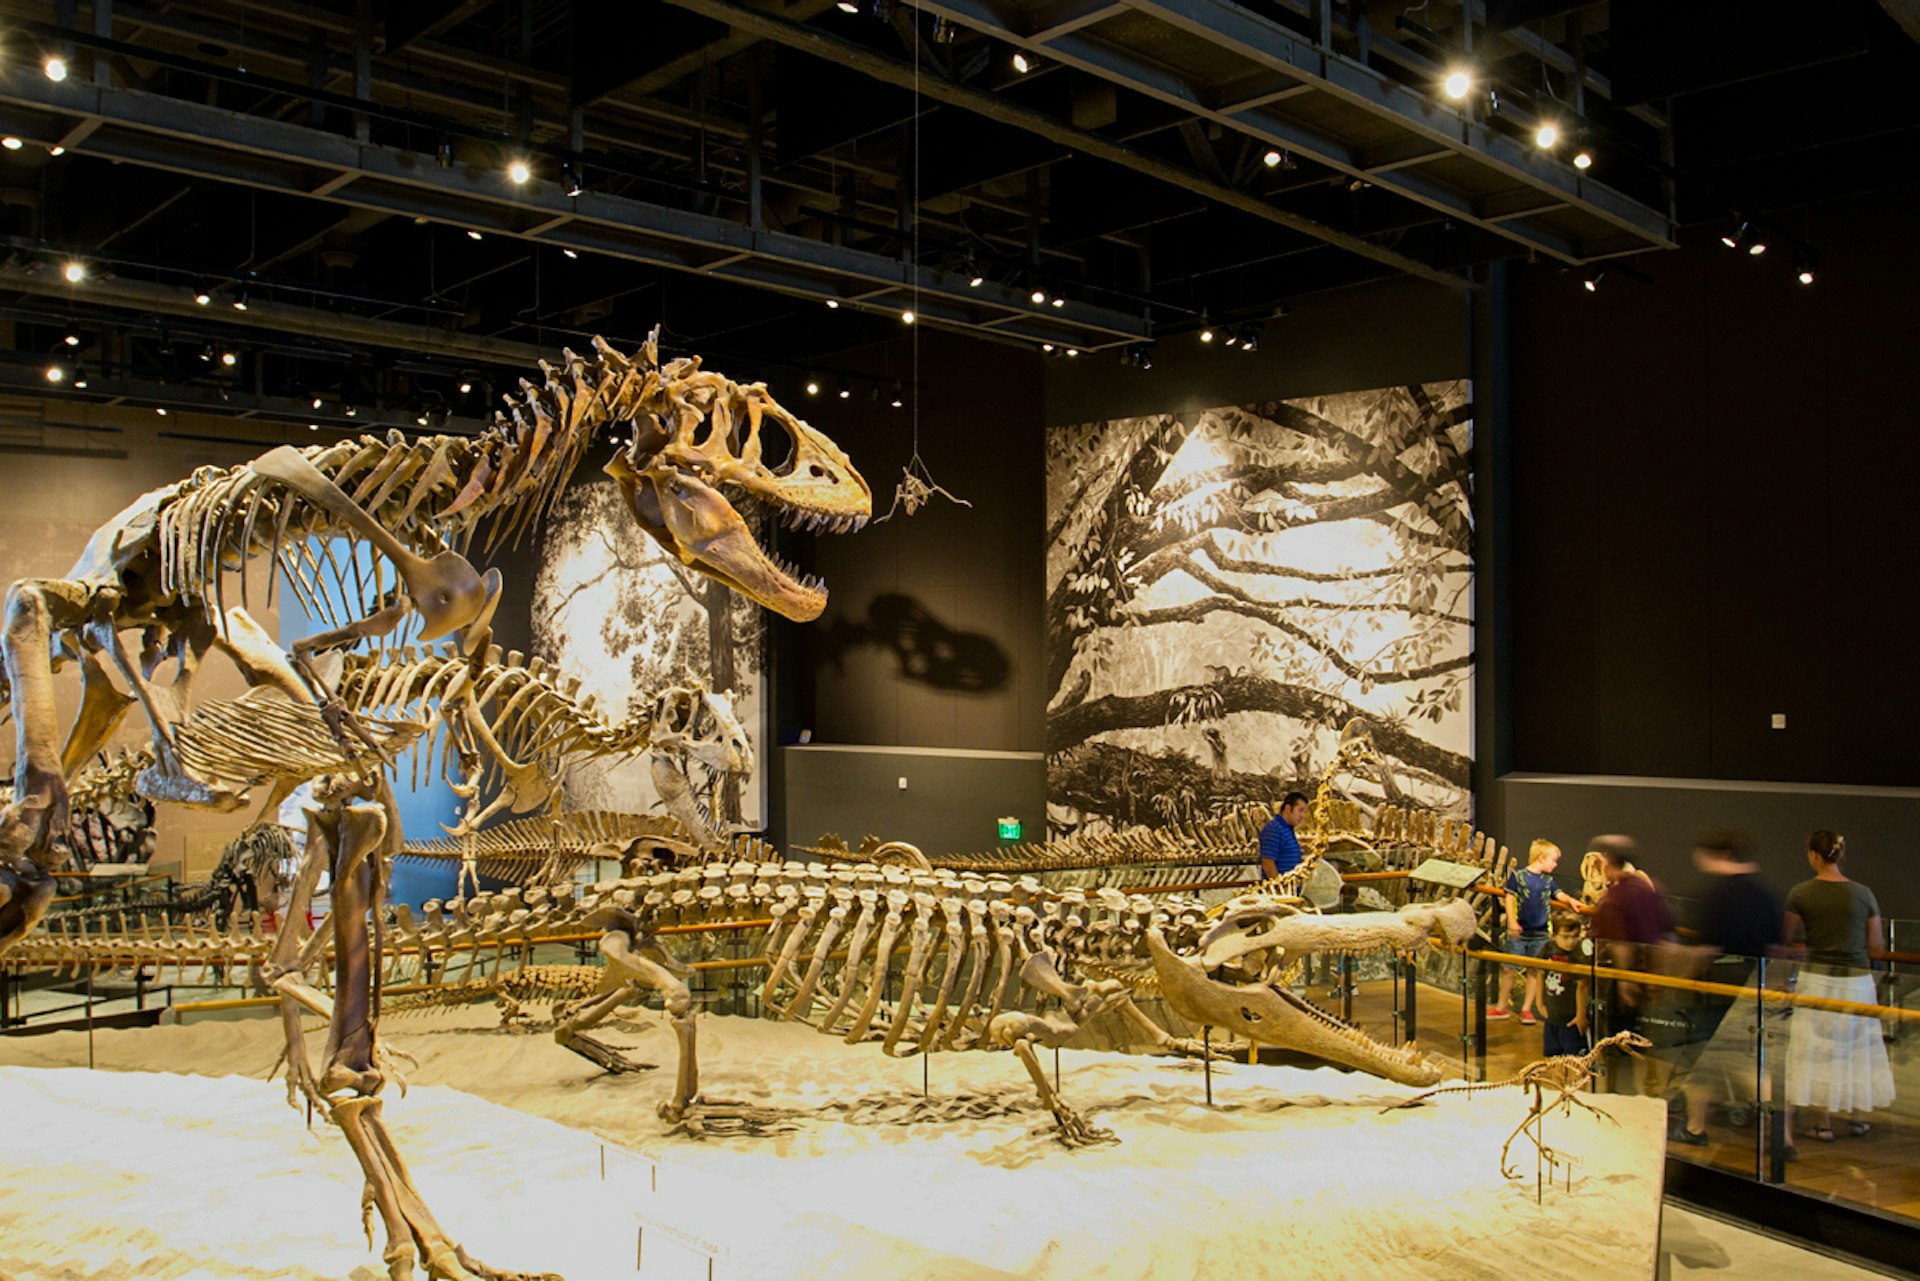 The Natural History Museum provides hours of entertainment (and education) for kids and adults alike. Image by Andy Christiani / Lonely Planet